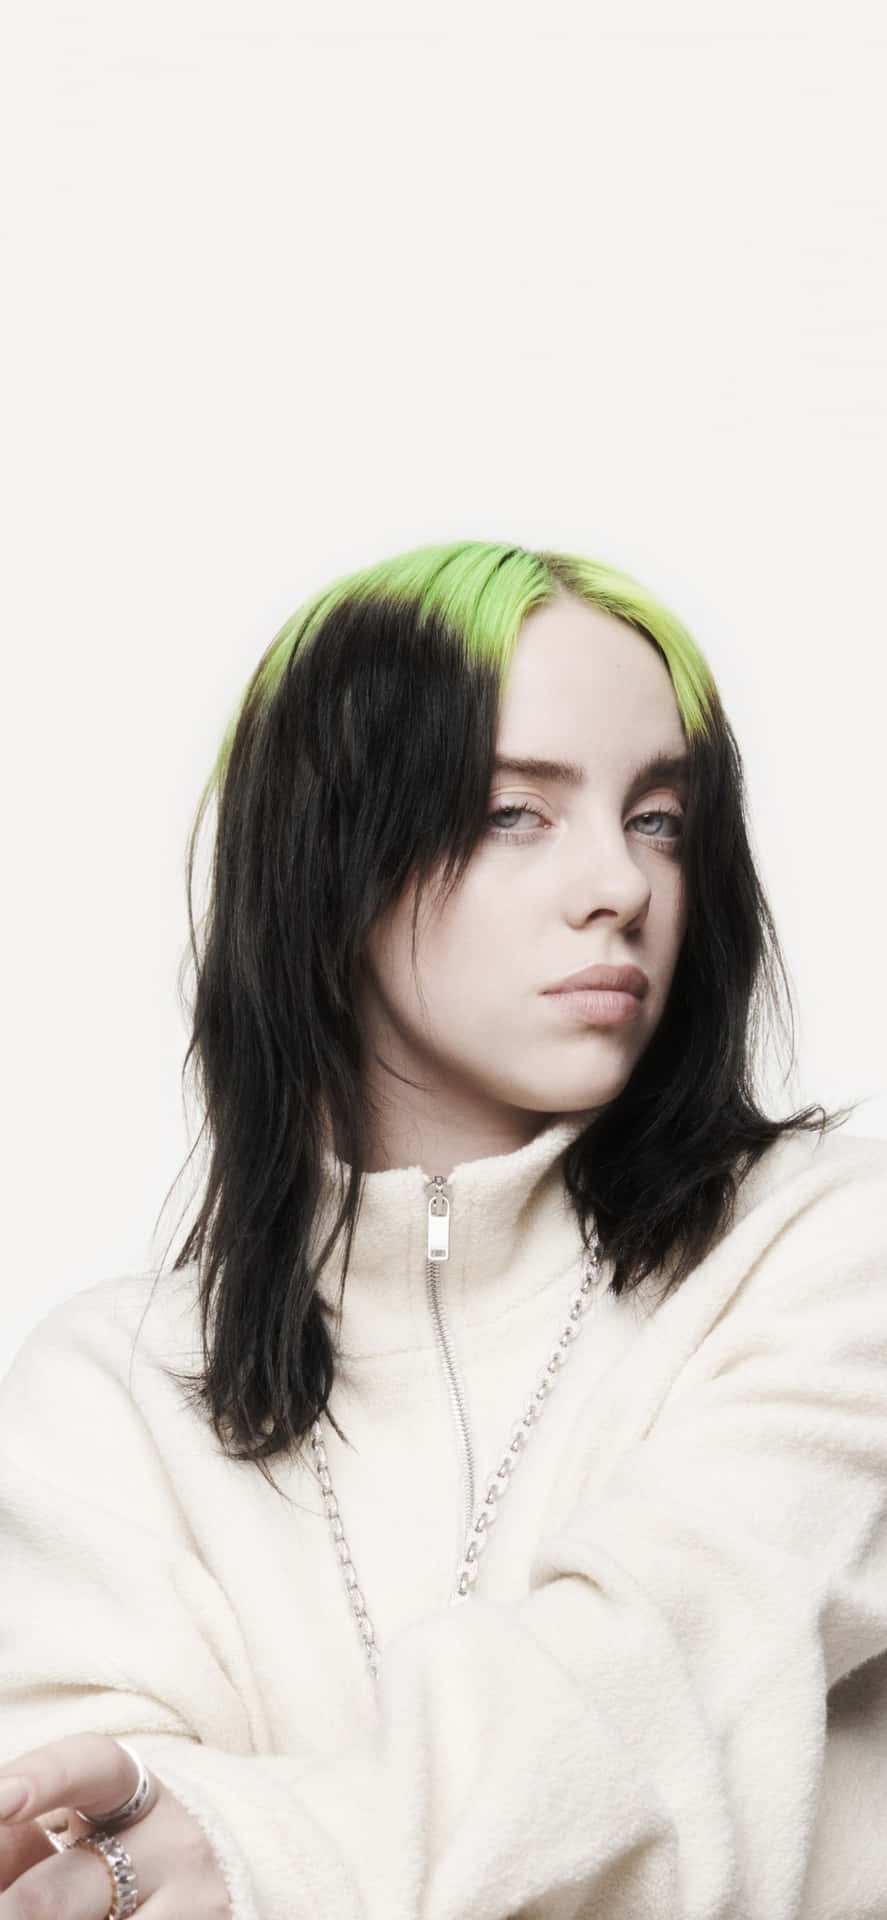 Billie Eilish on stage, showing off her unique style